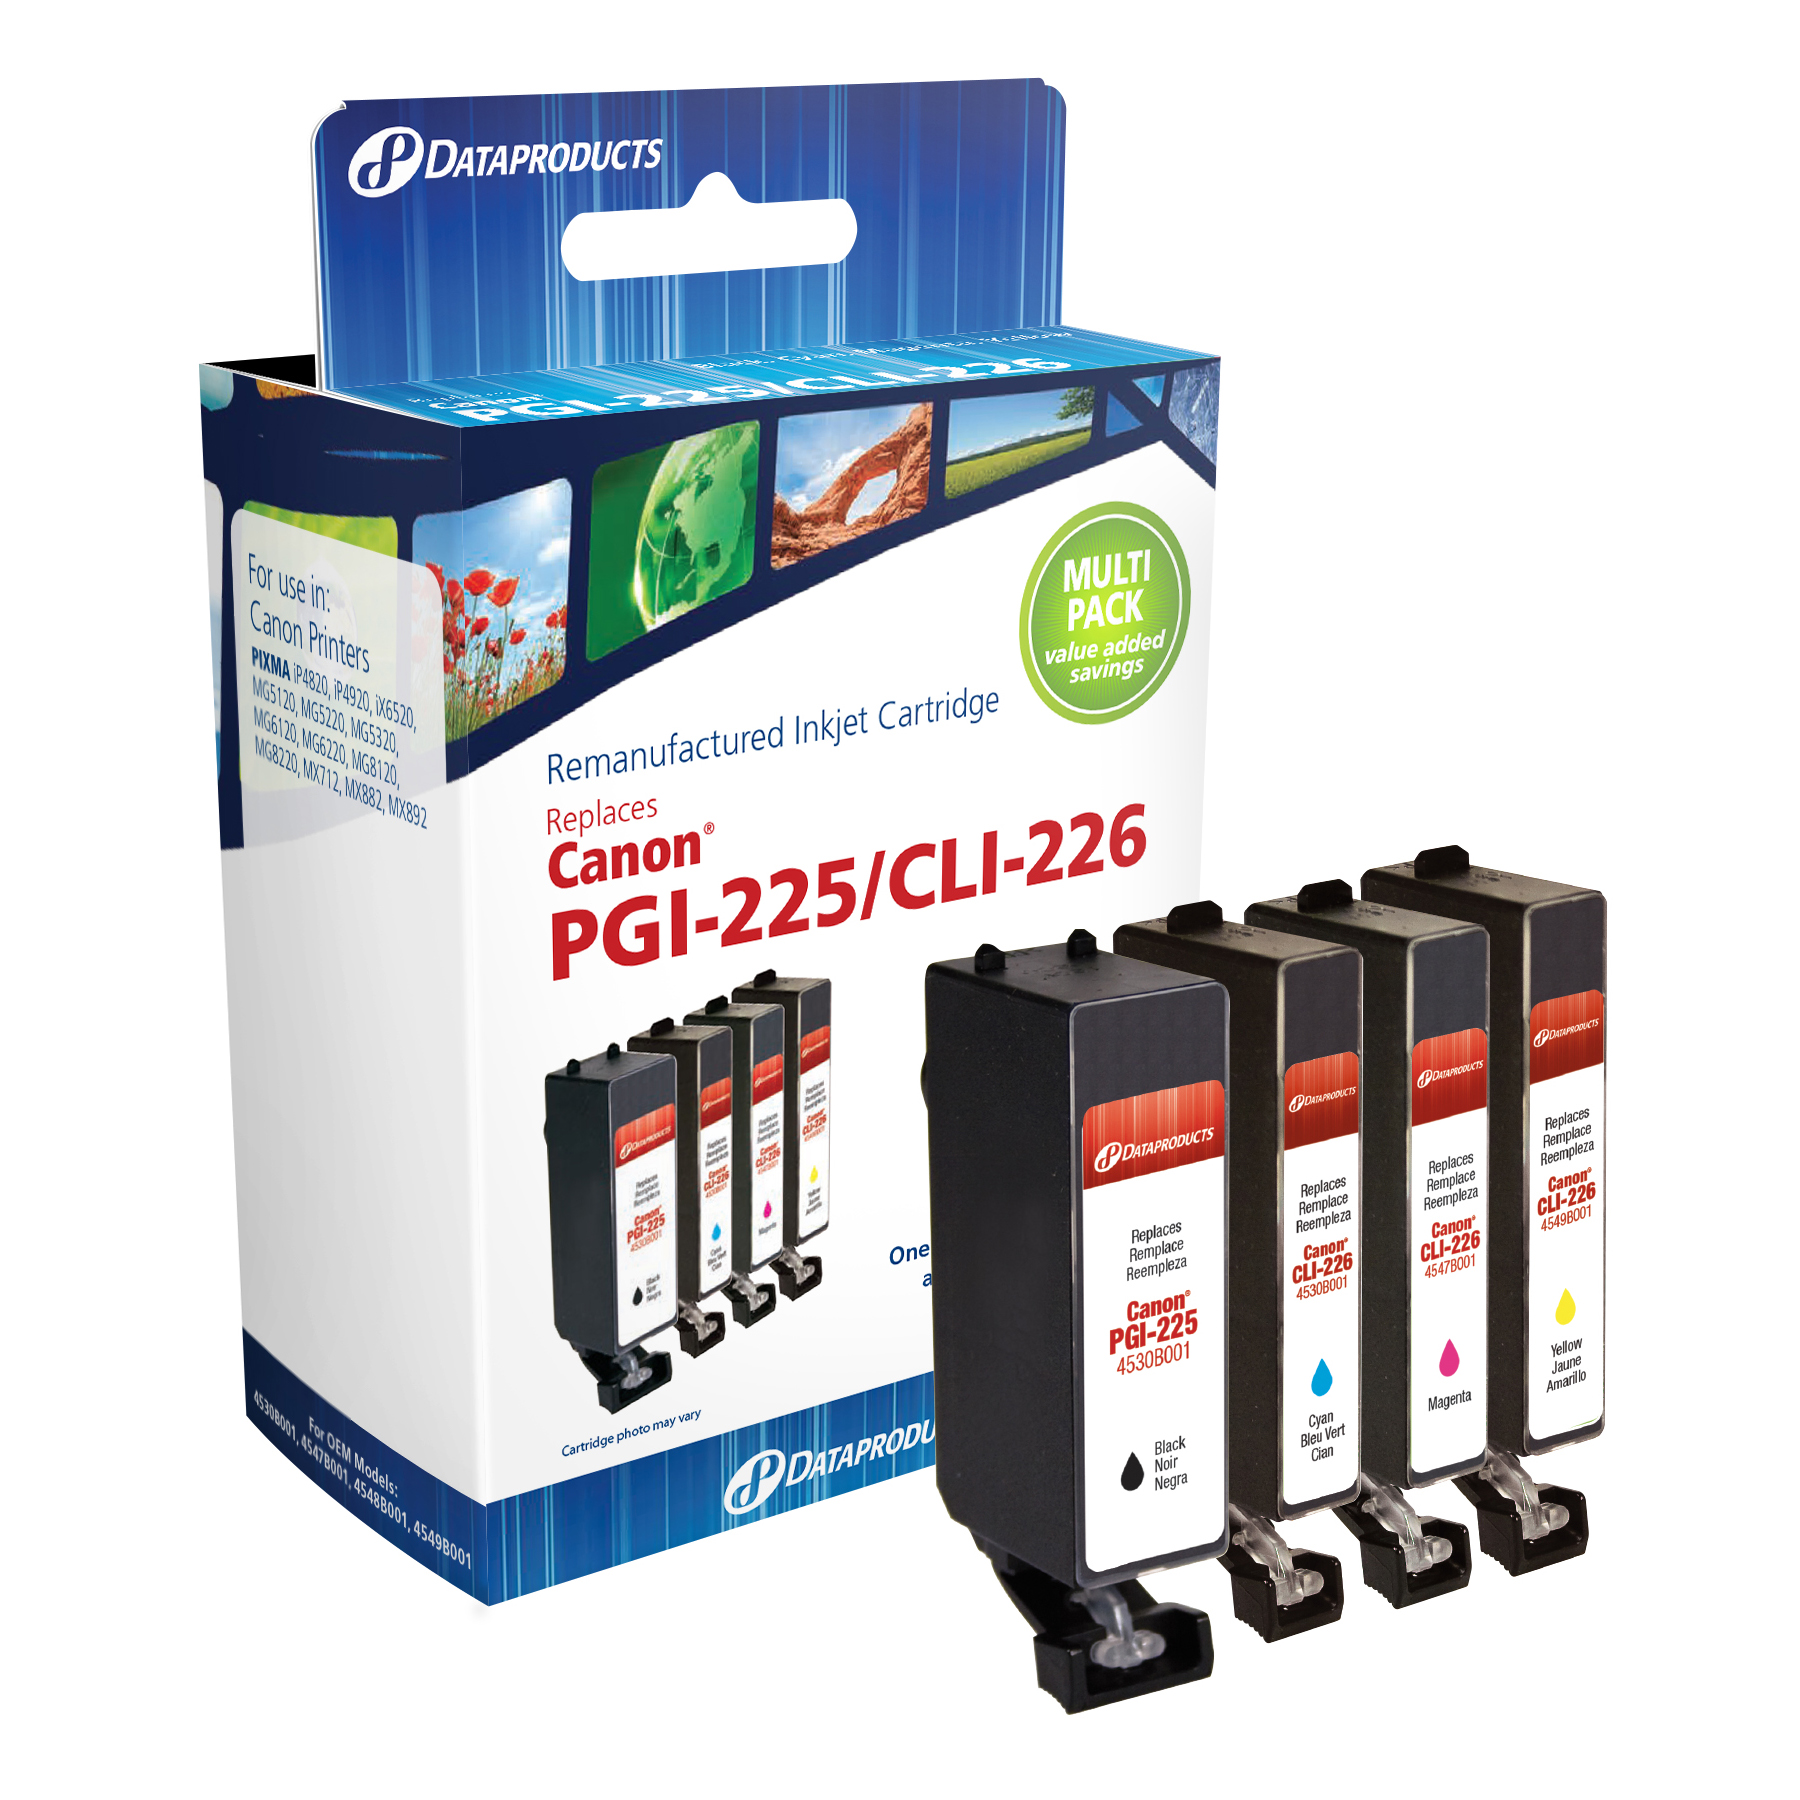 Dataproducts DPC225226MP Remanufactured Inkjet Cartridge for Canon PGI-225 and CLI-226 - Black and Color Ink 4-Pack